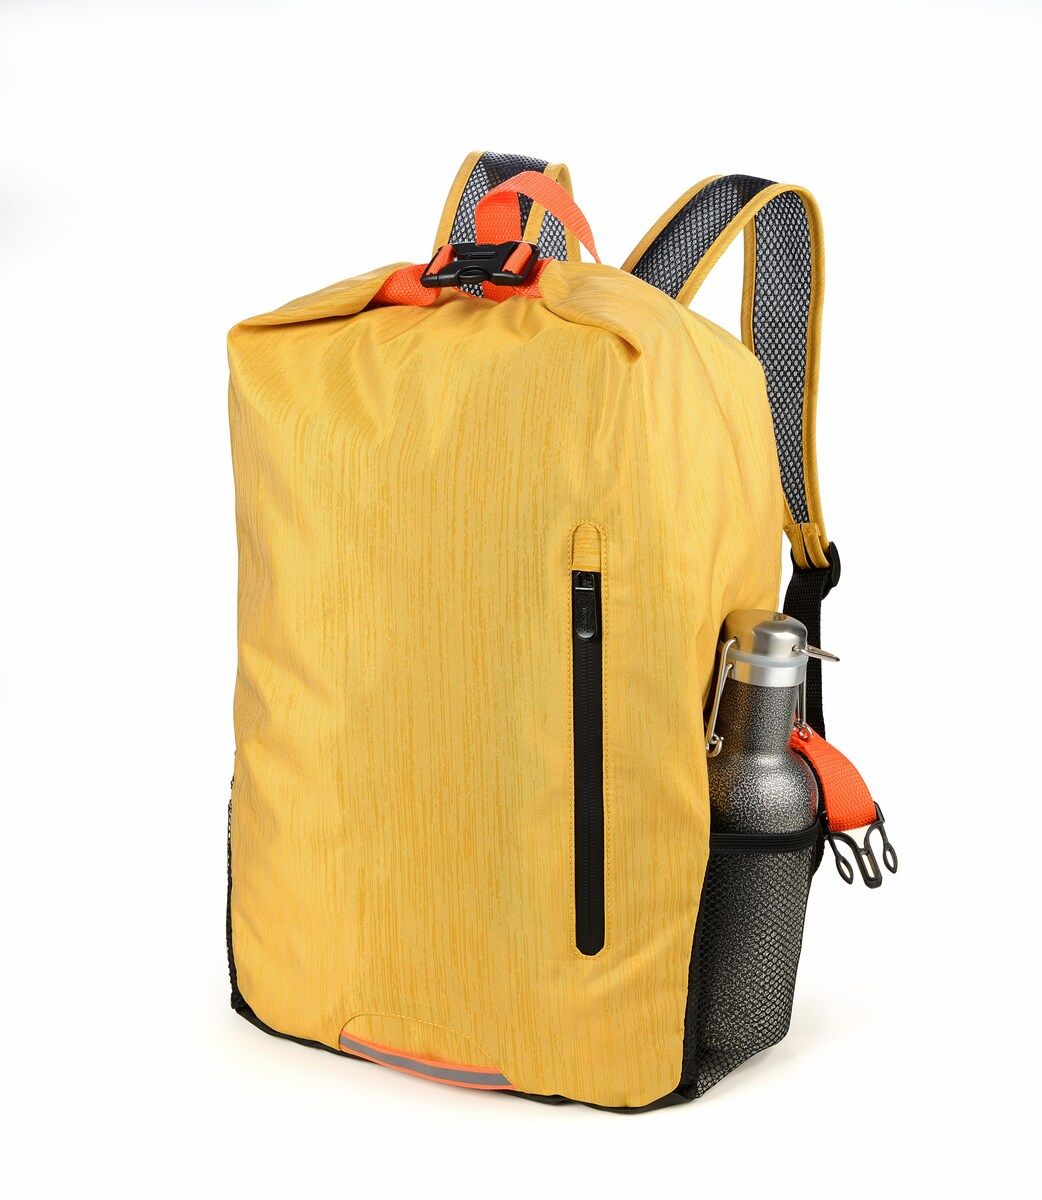 TROIKA Backpack: Rolltop Folding Backpack 15L Capacity, 10kg Load TREKPACK YellowTROIKA Backpack: Rolltop Folding Backpack 15L Capacity, 10kg Load TREKPACK Yellow